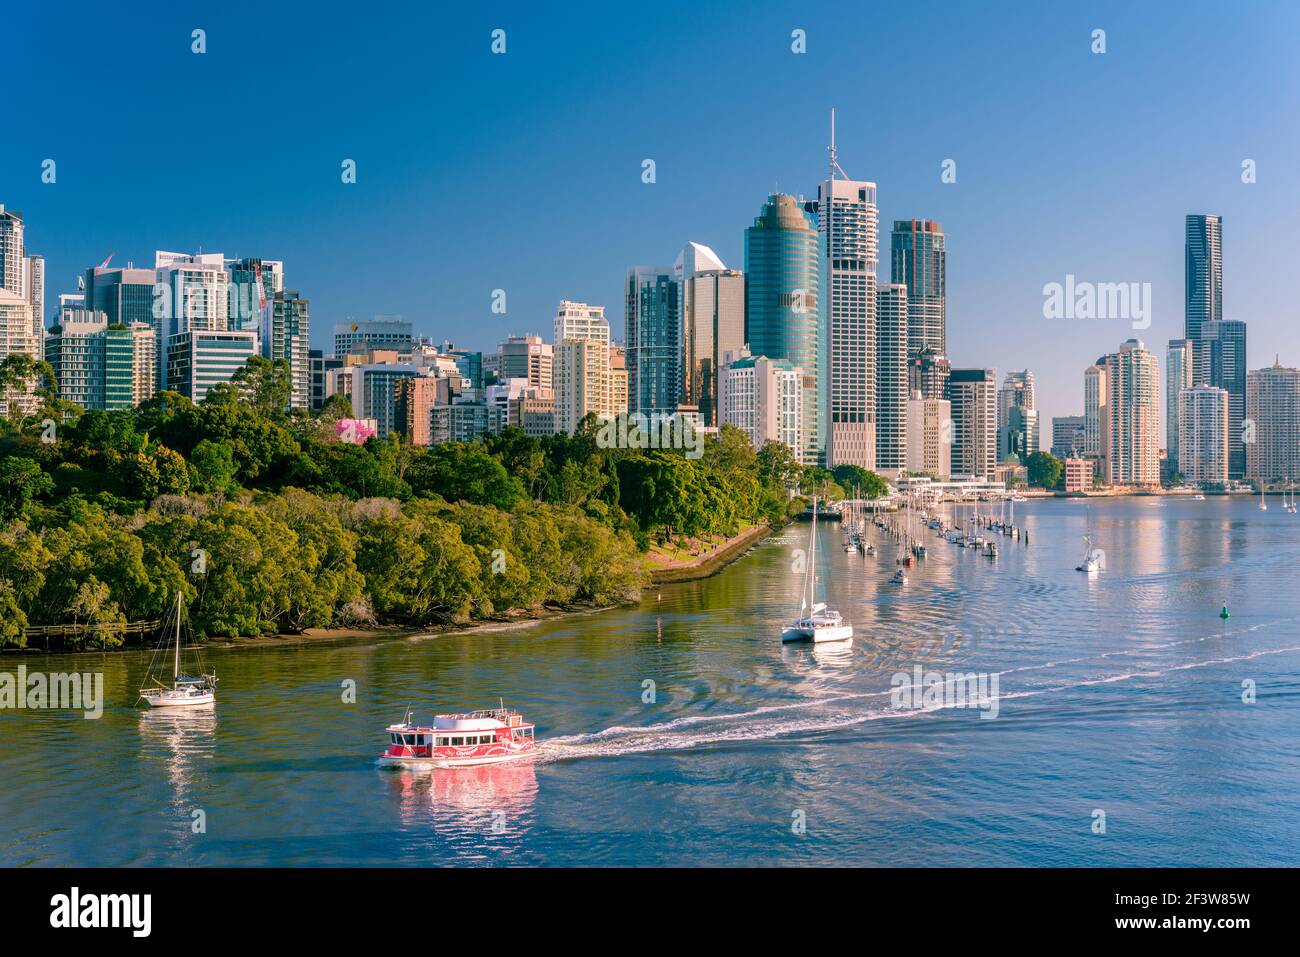 Morning view of Brisbane city and river from Kangaroo Point. Brisbane is the state capital of Queensland, Australia. Stock Photo